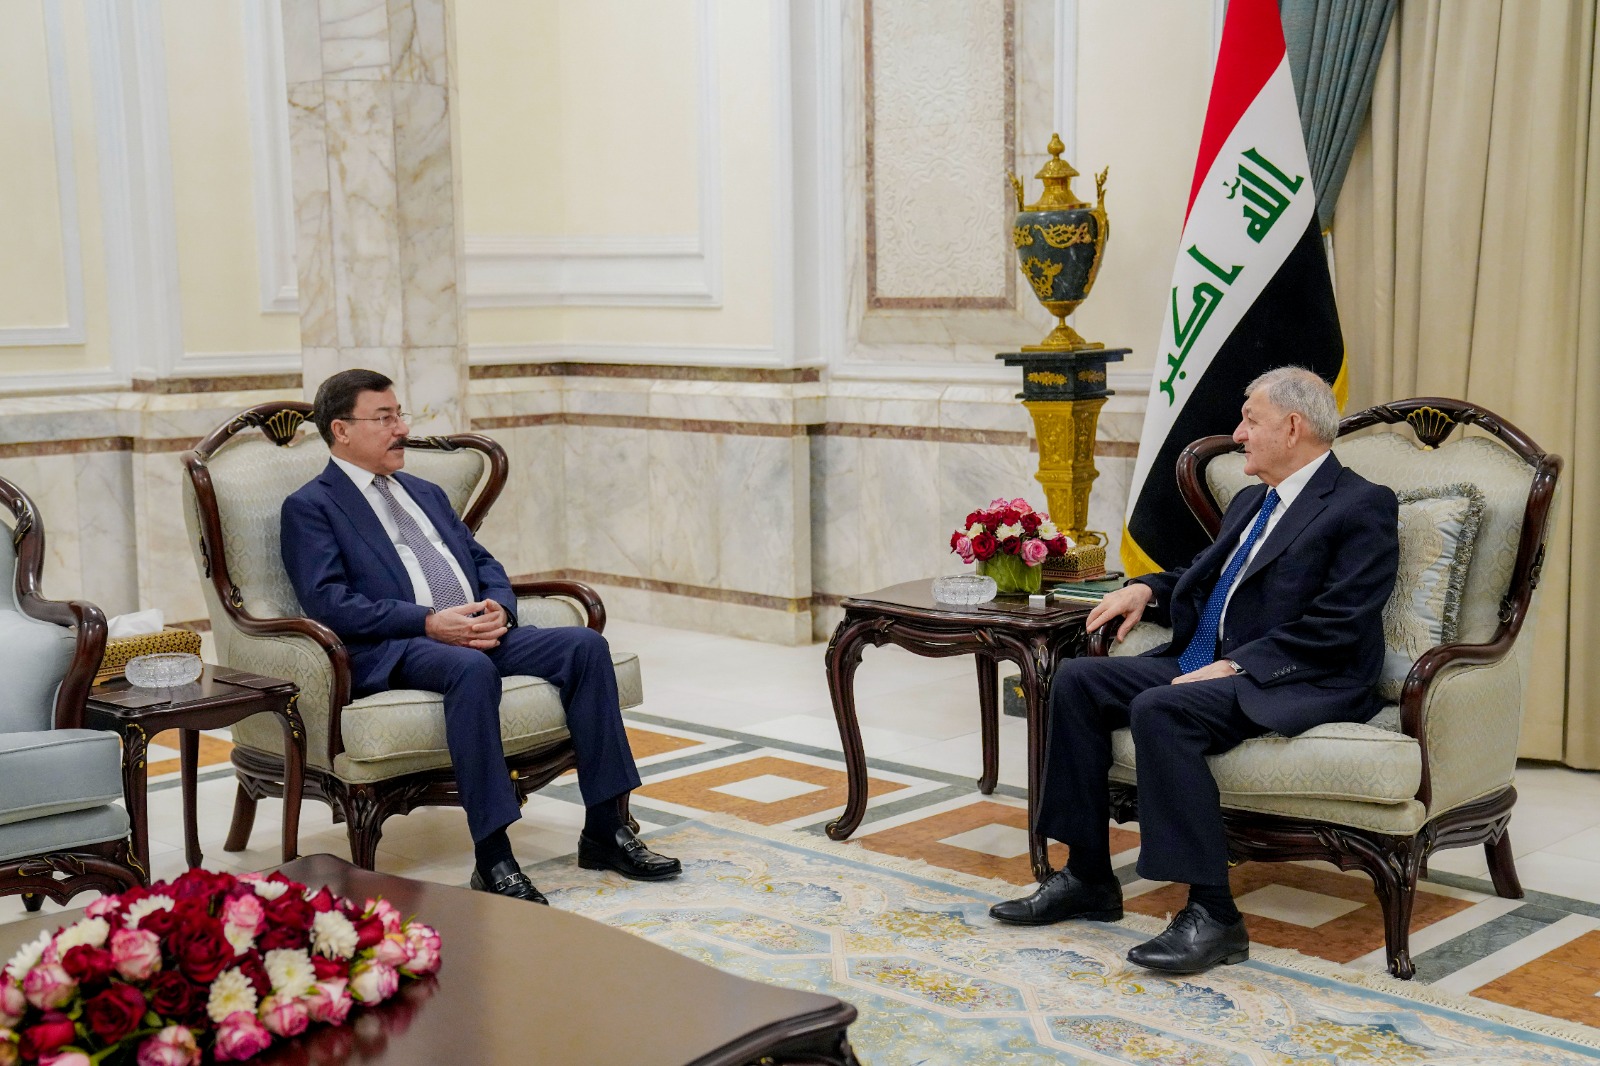 The Governor of the Central Bank meets the President of the Republic of Iraq